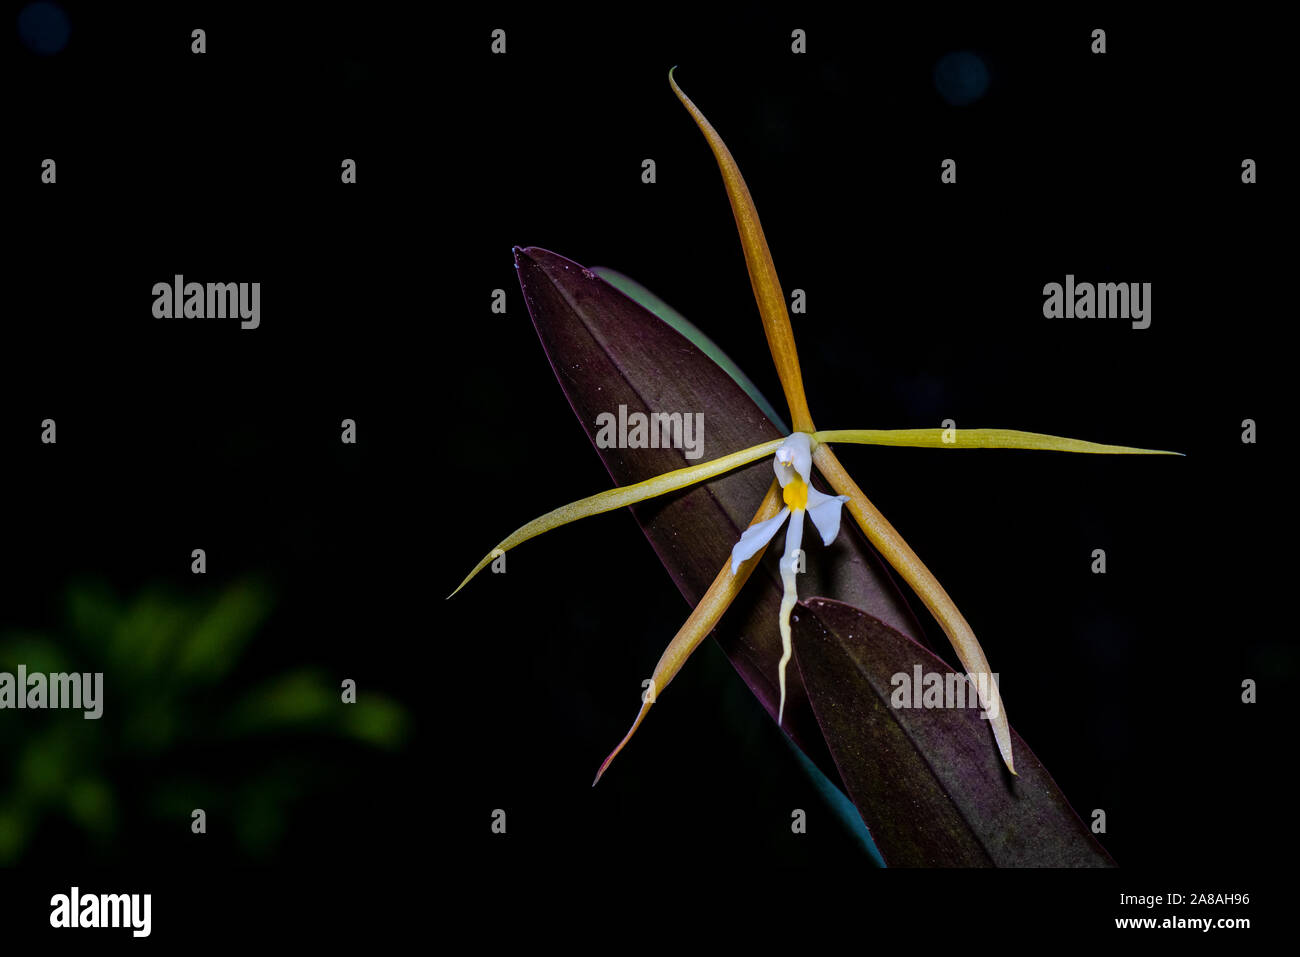 Epidendrum nocturnum, Night scented orchid with dark background image taken in Panama Stock Photo